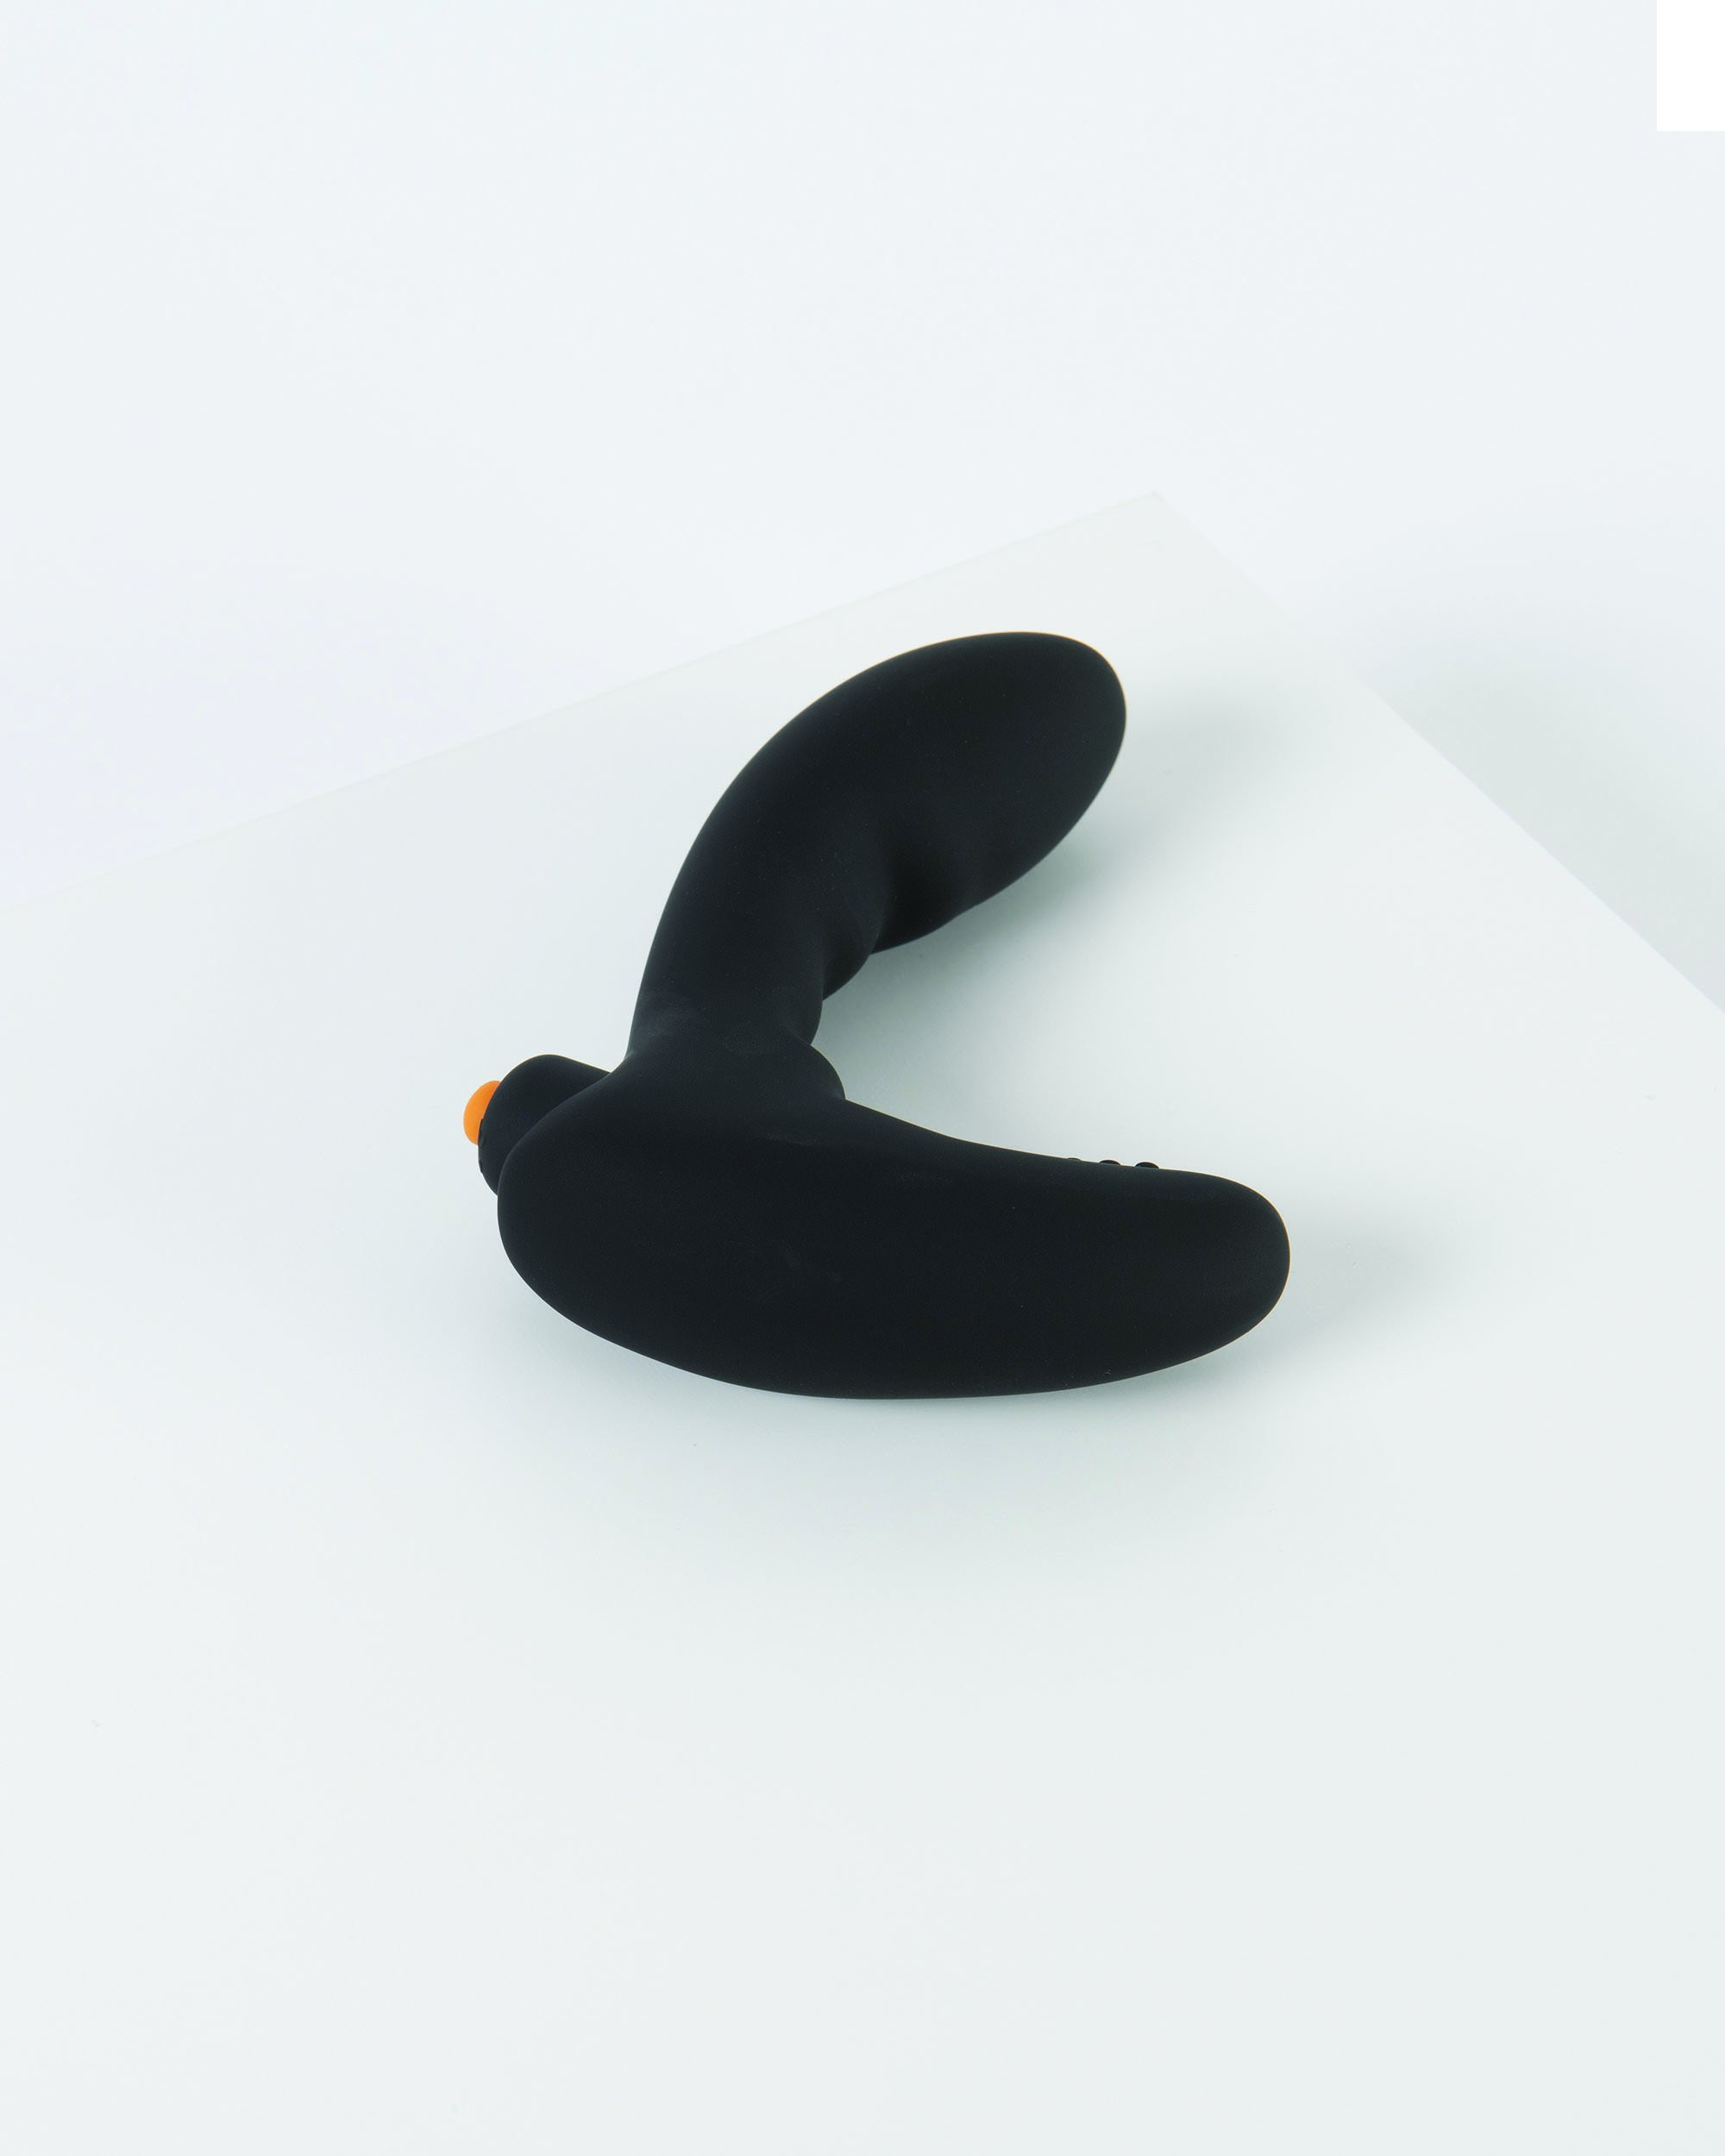 Experience mind-blowing anal sensations with The Vibrating Prostate Massager. The curved shape and thicker tip targets the P spot and is designed to stay in position for intensely satisfying stimulation. Packed with power, the removable bullet with 7 v #sex